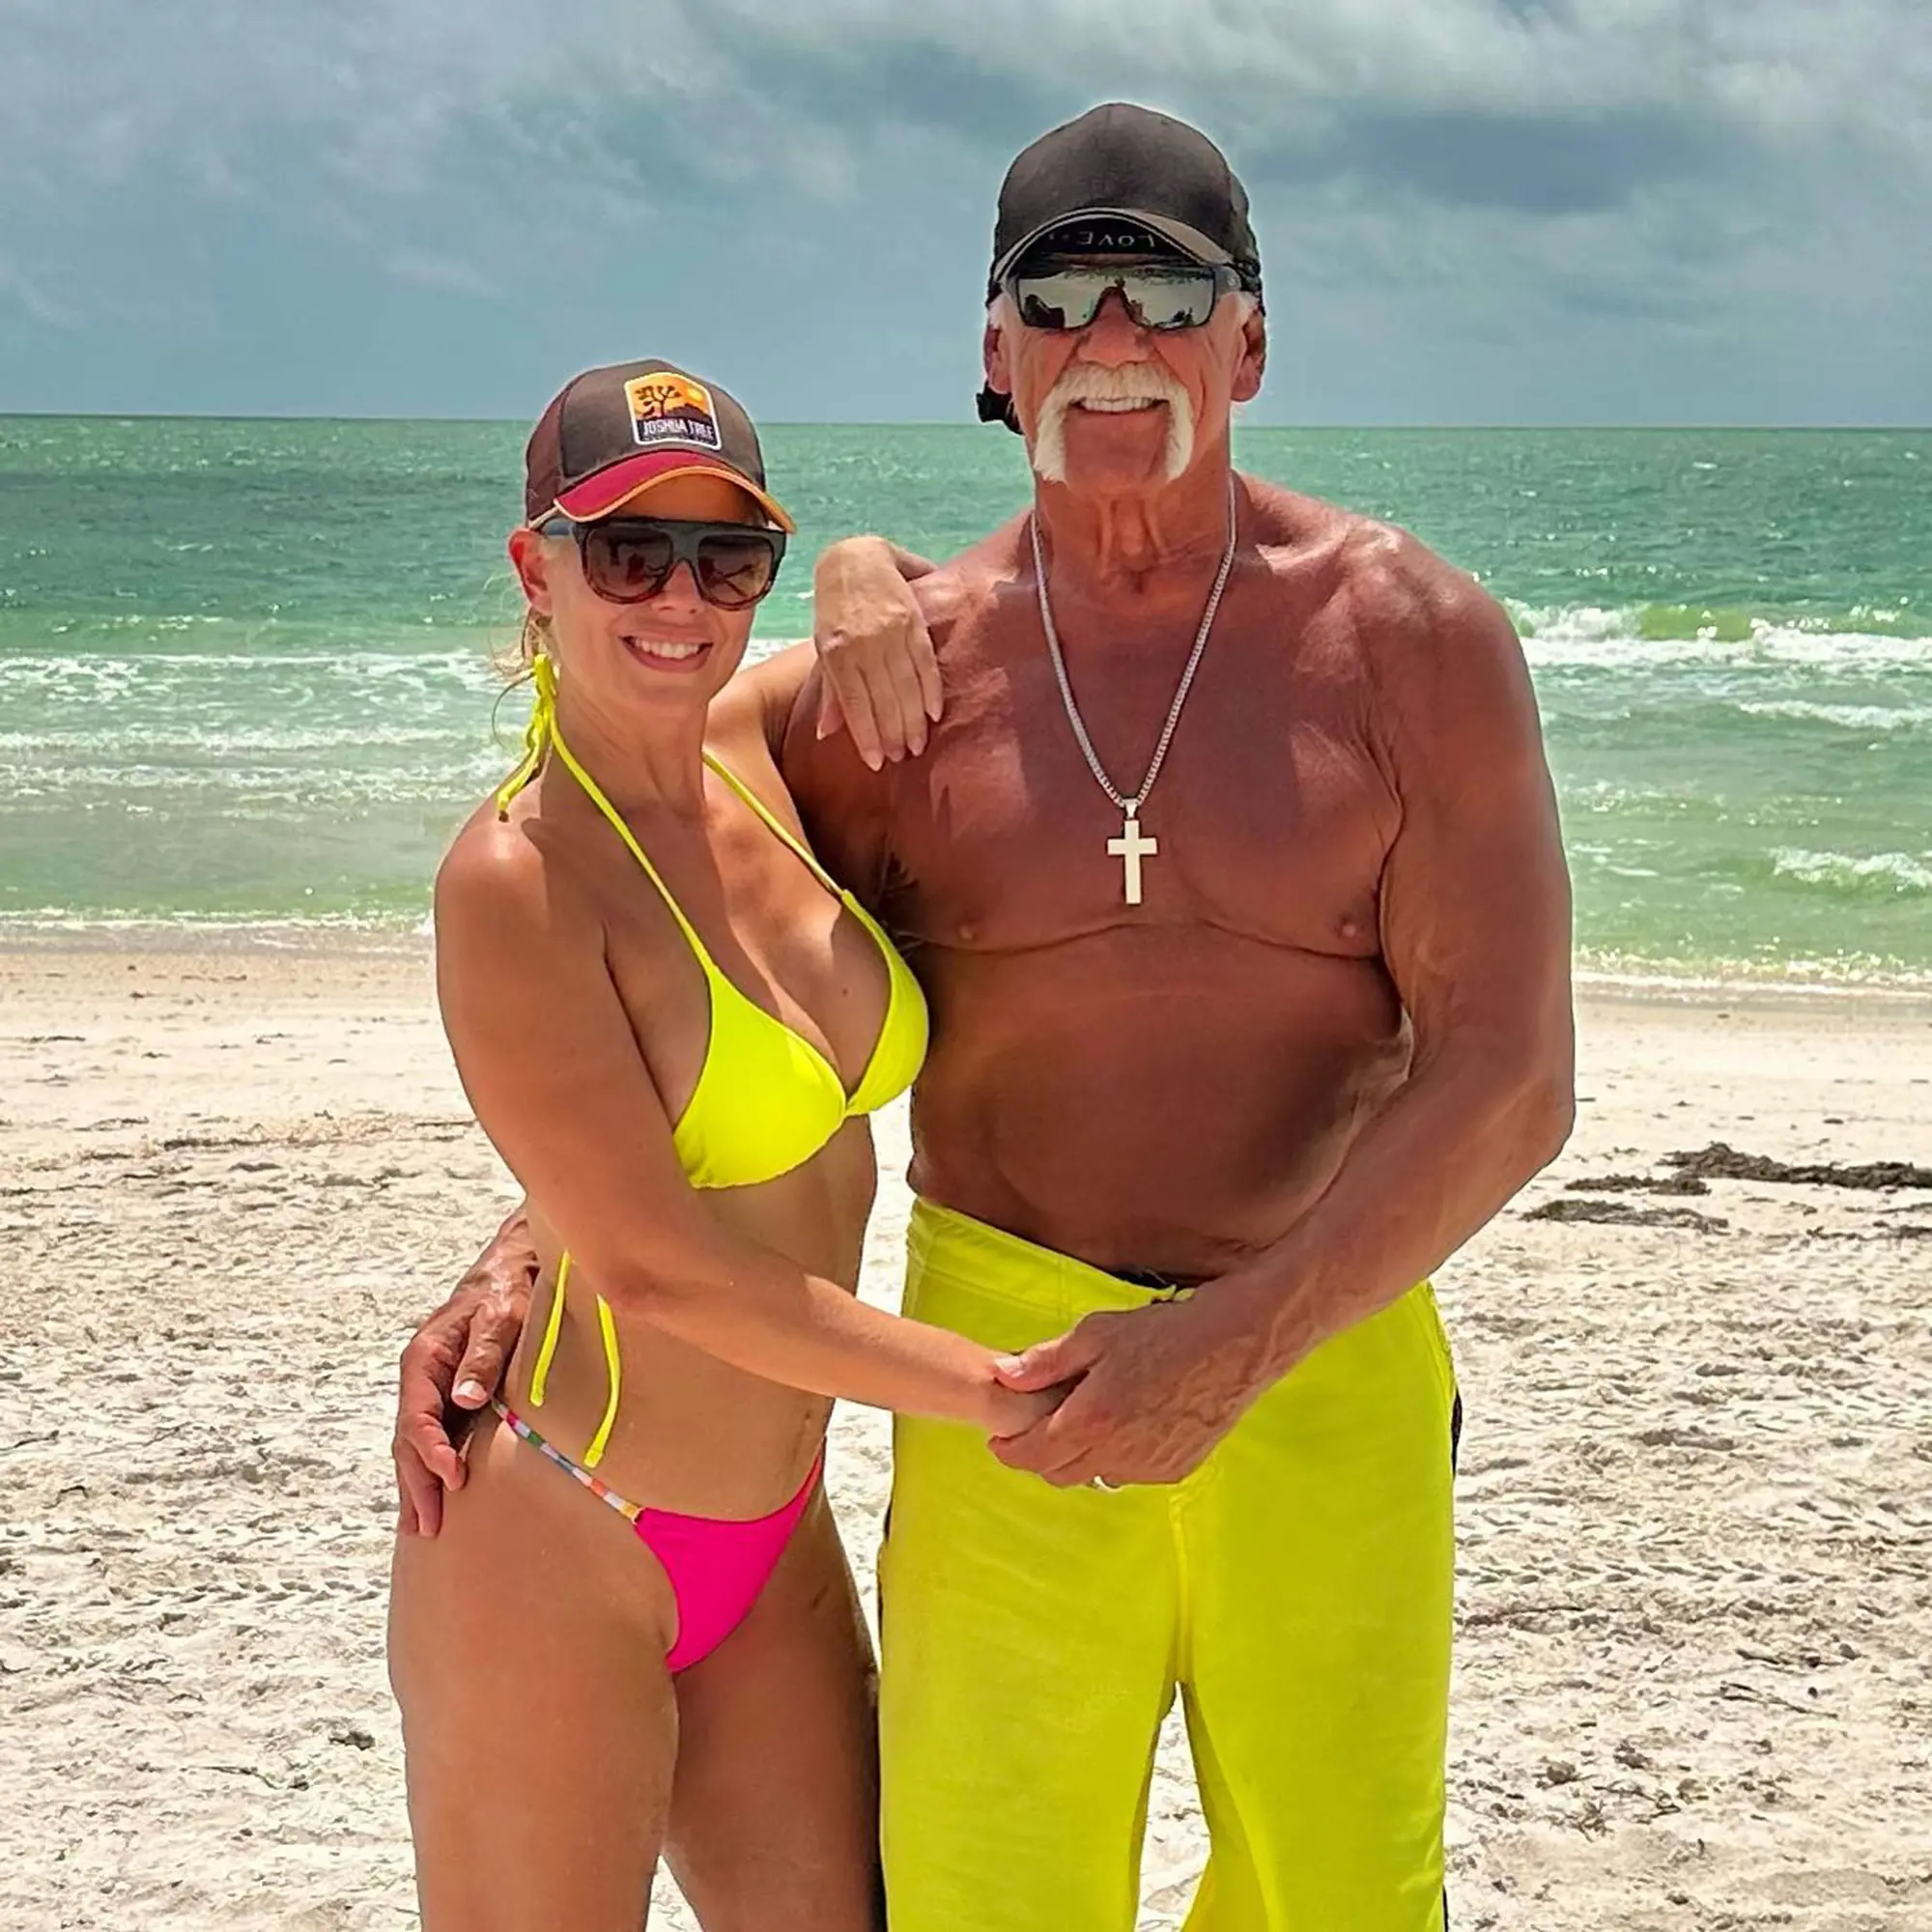 Hulk Hogan is officially married for a third time.